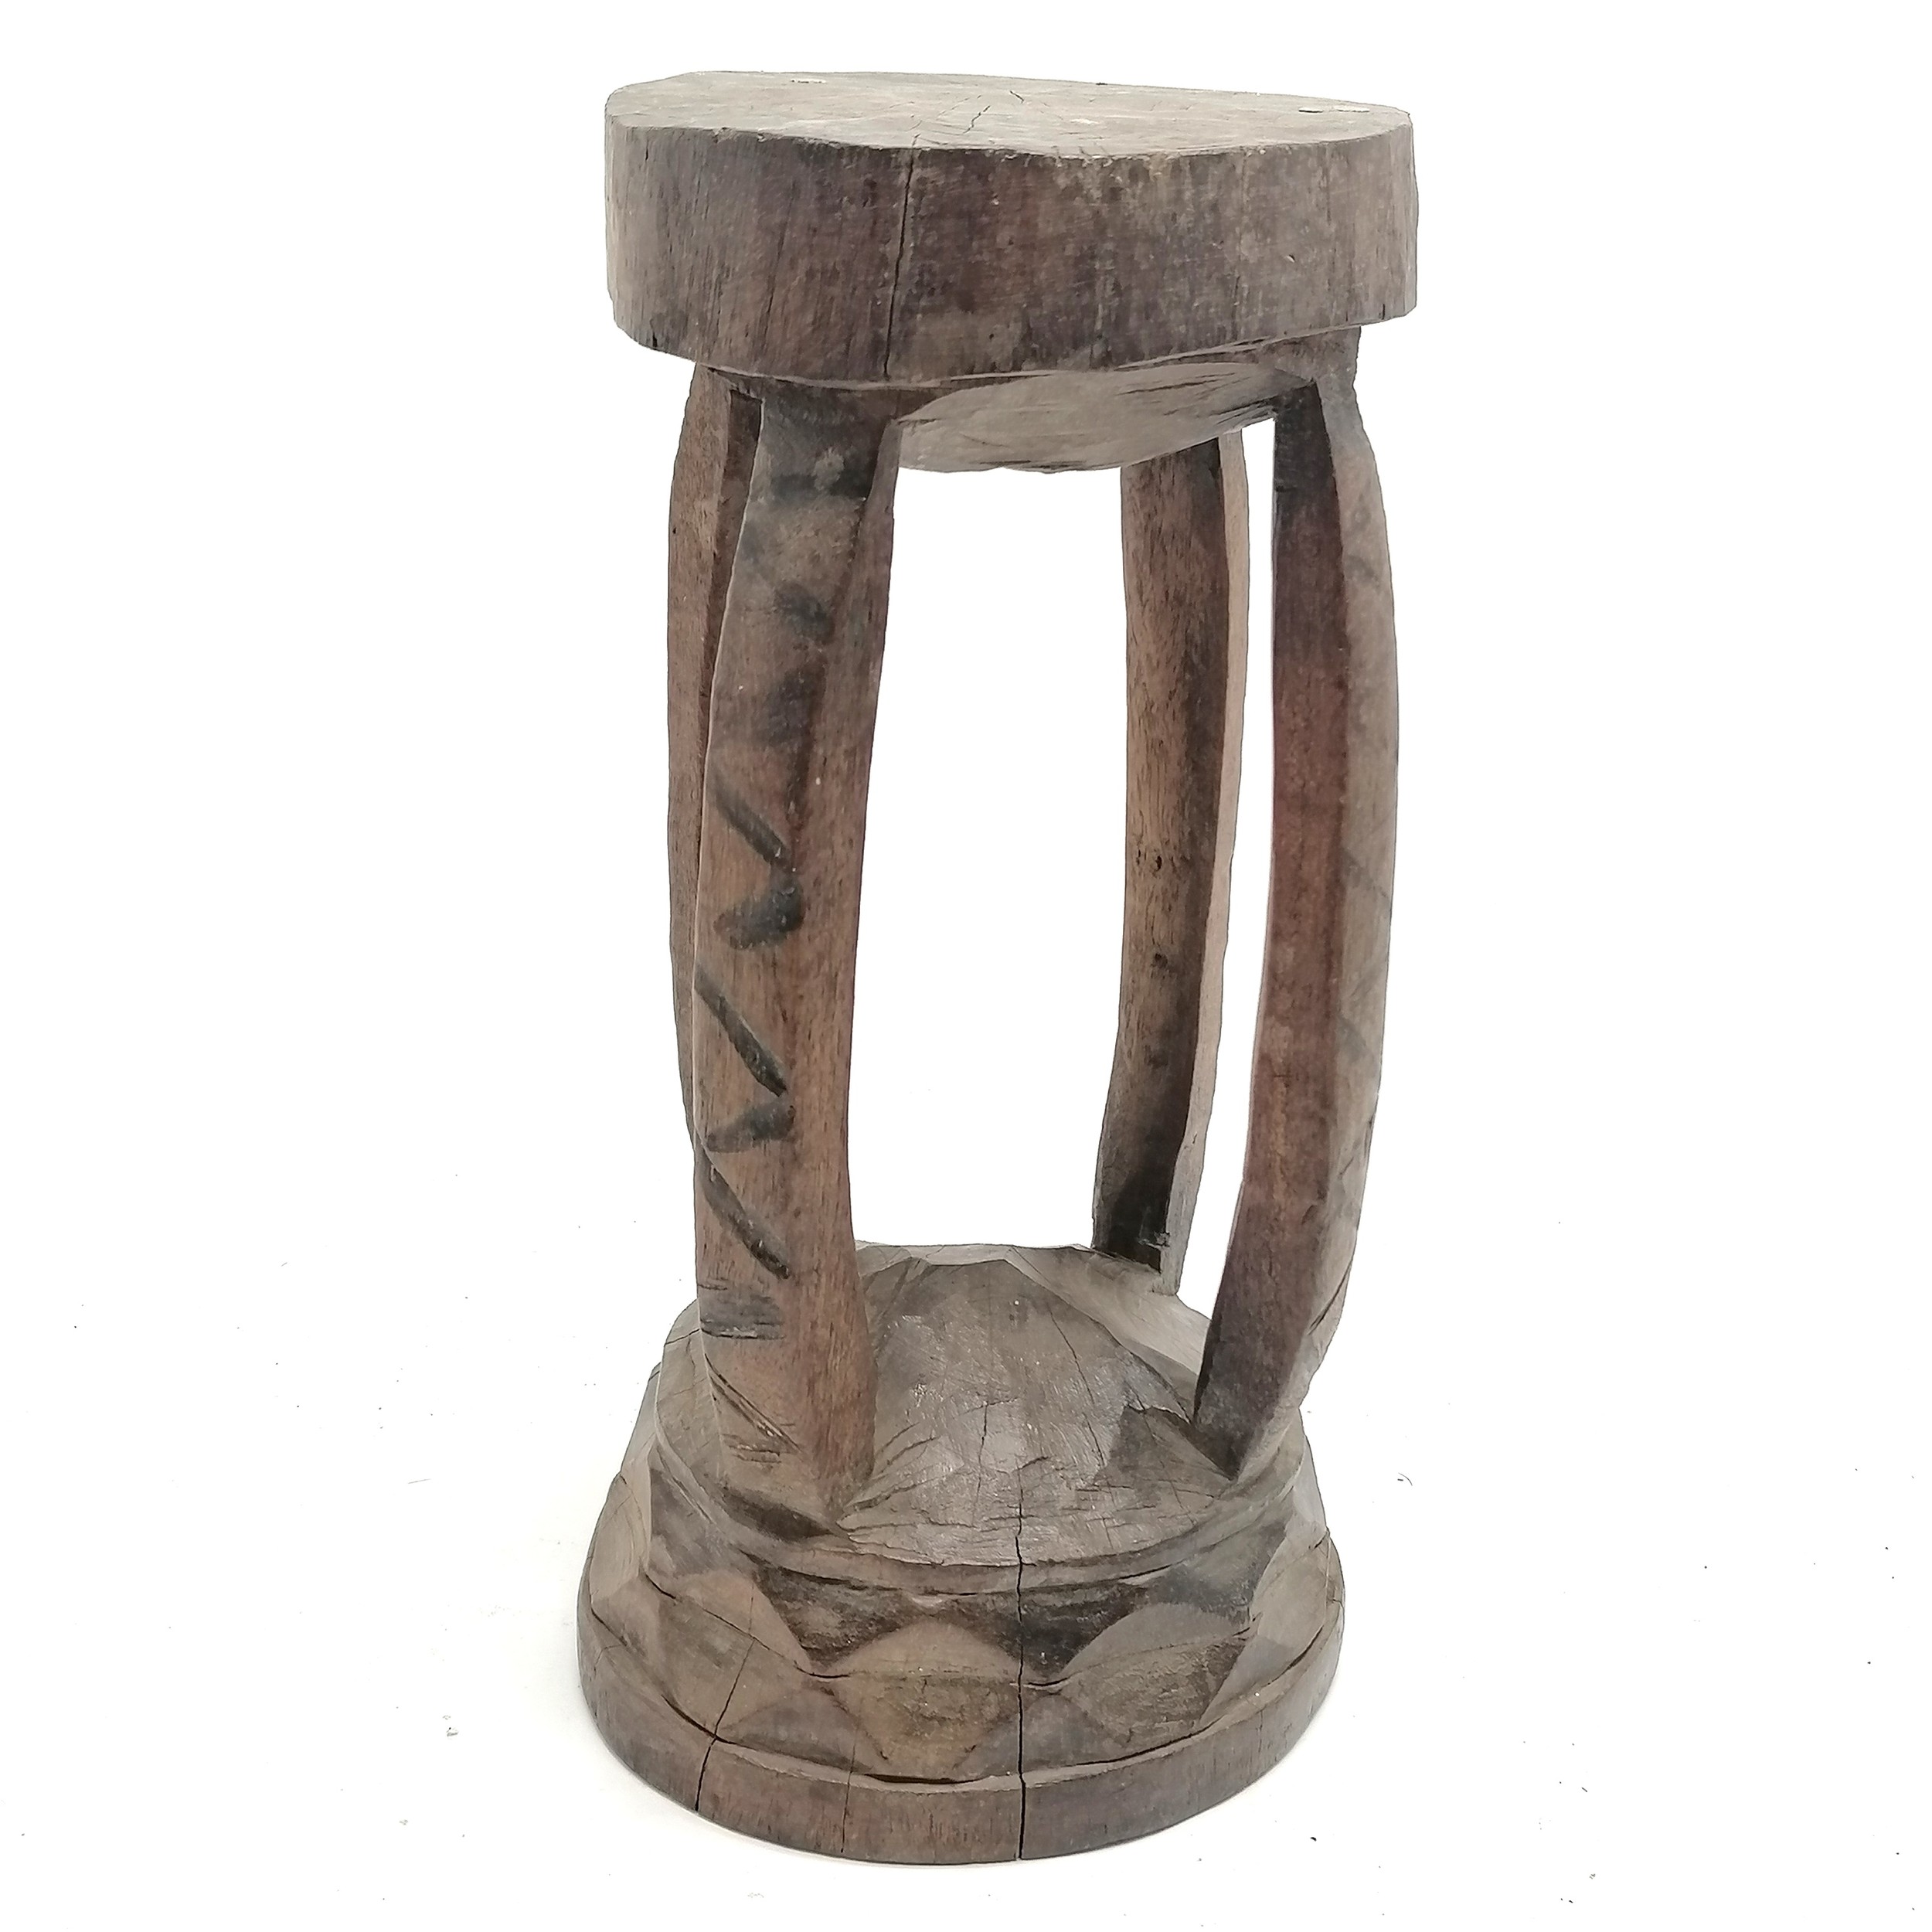 Tribal carved wooden stool43cm x 23cm - has loss to the top detail - some stress cracks - Image 3 of 3